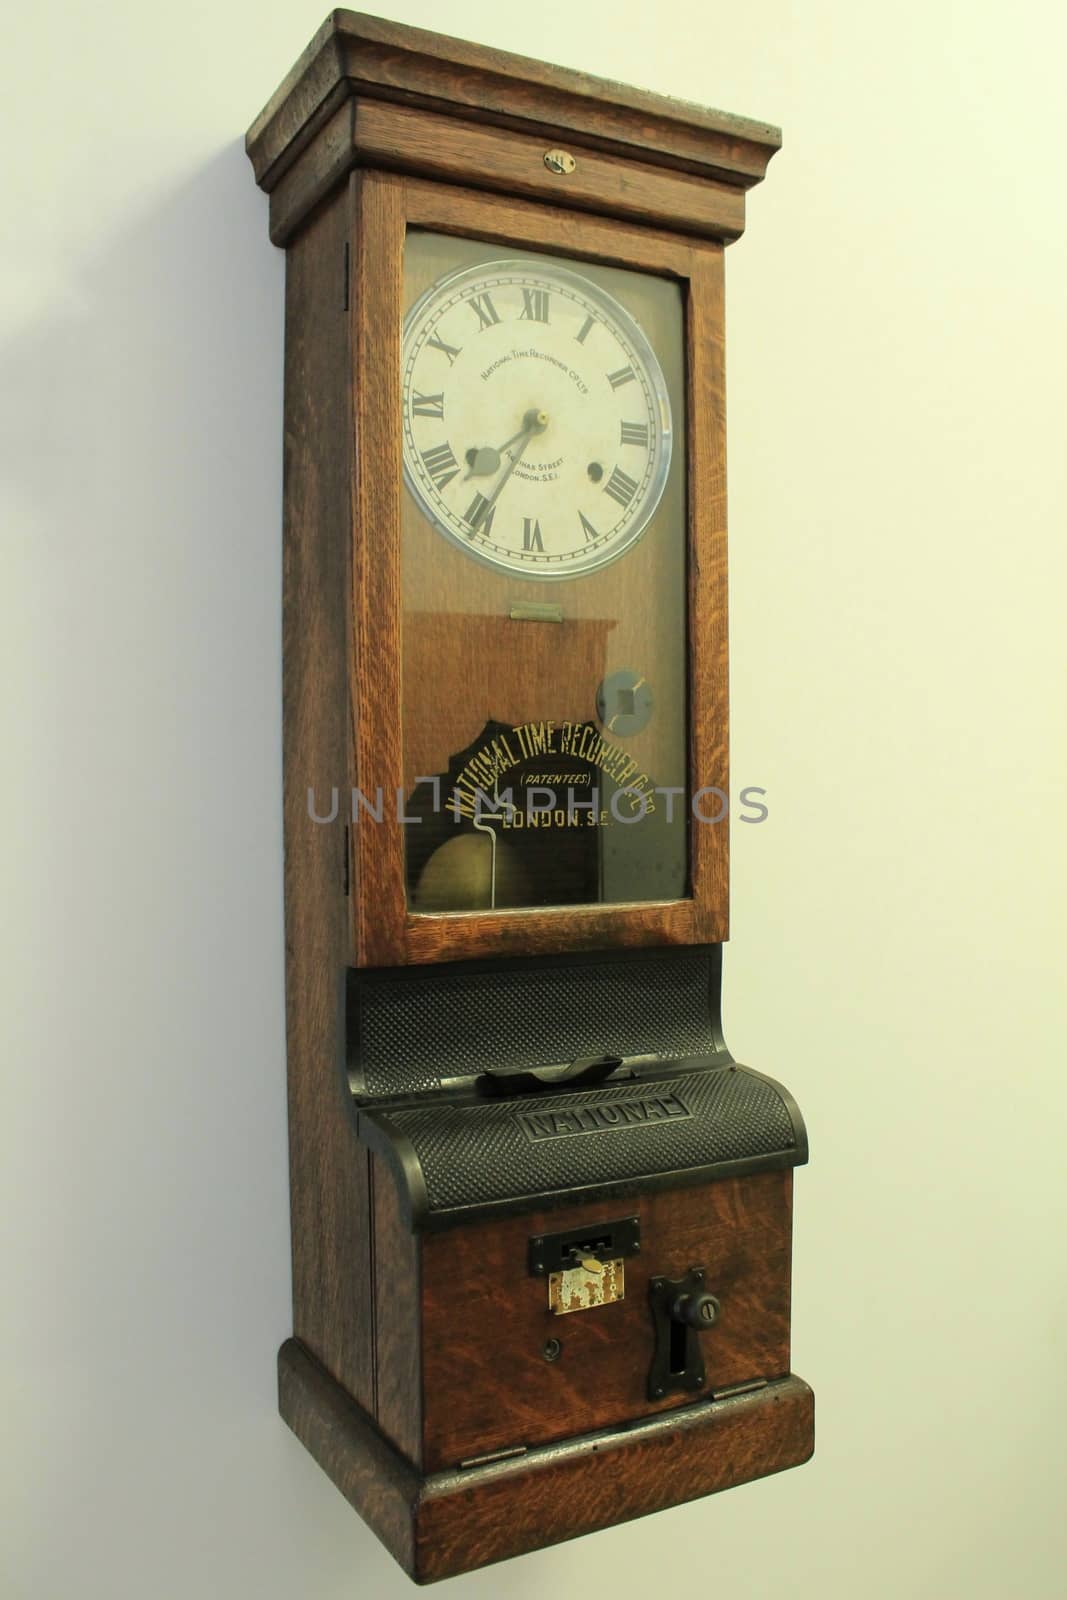 Old wooden clock by soniabonet